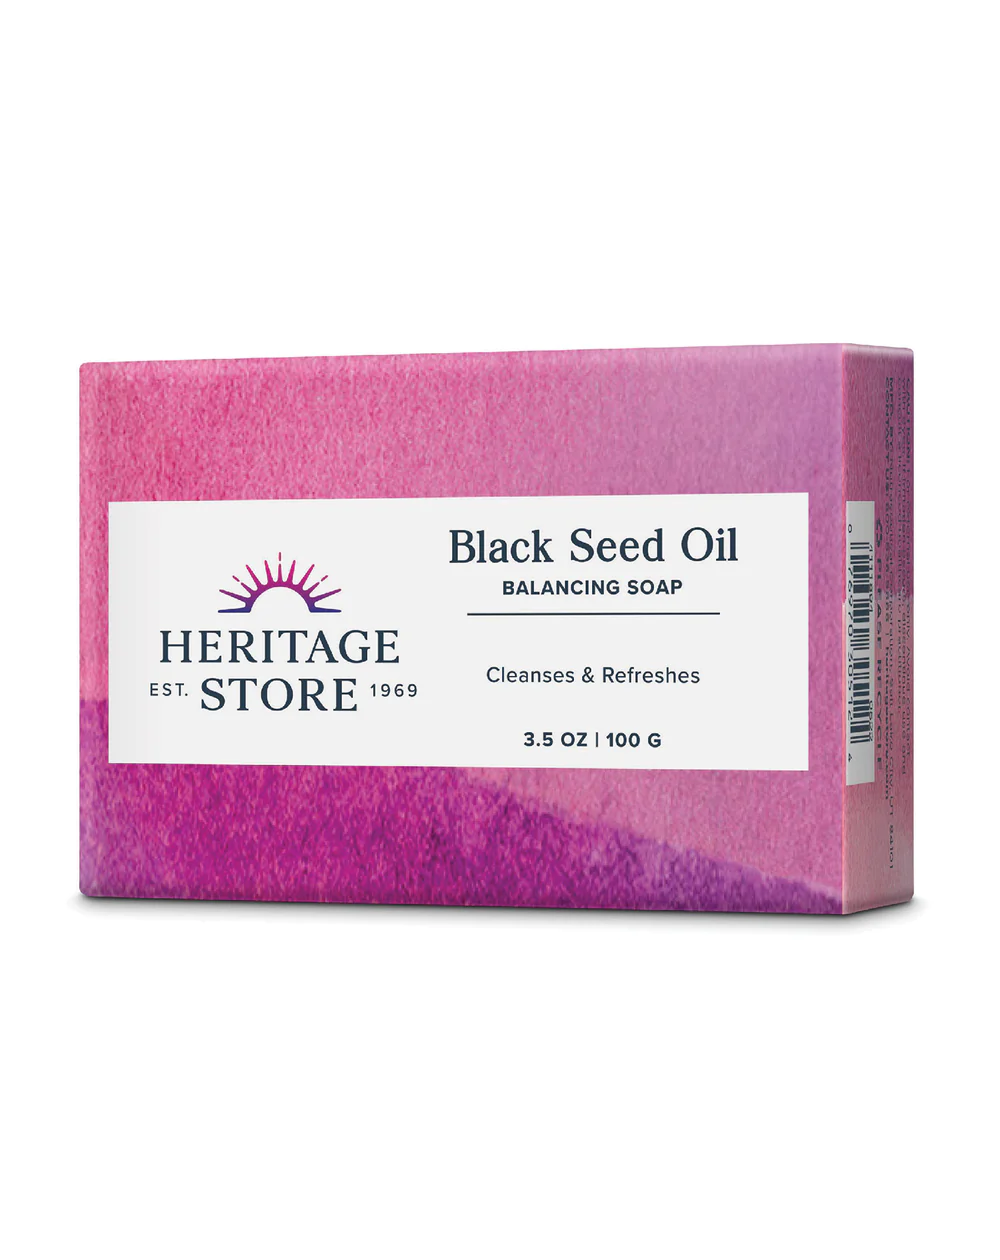 Black Seed Oil Soap Bar - Heritage Store